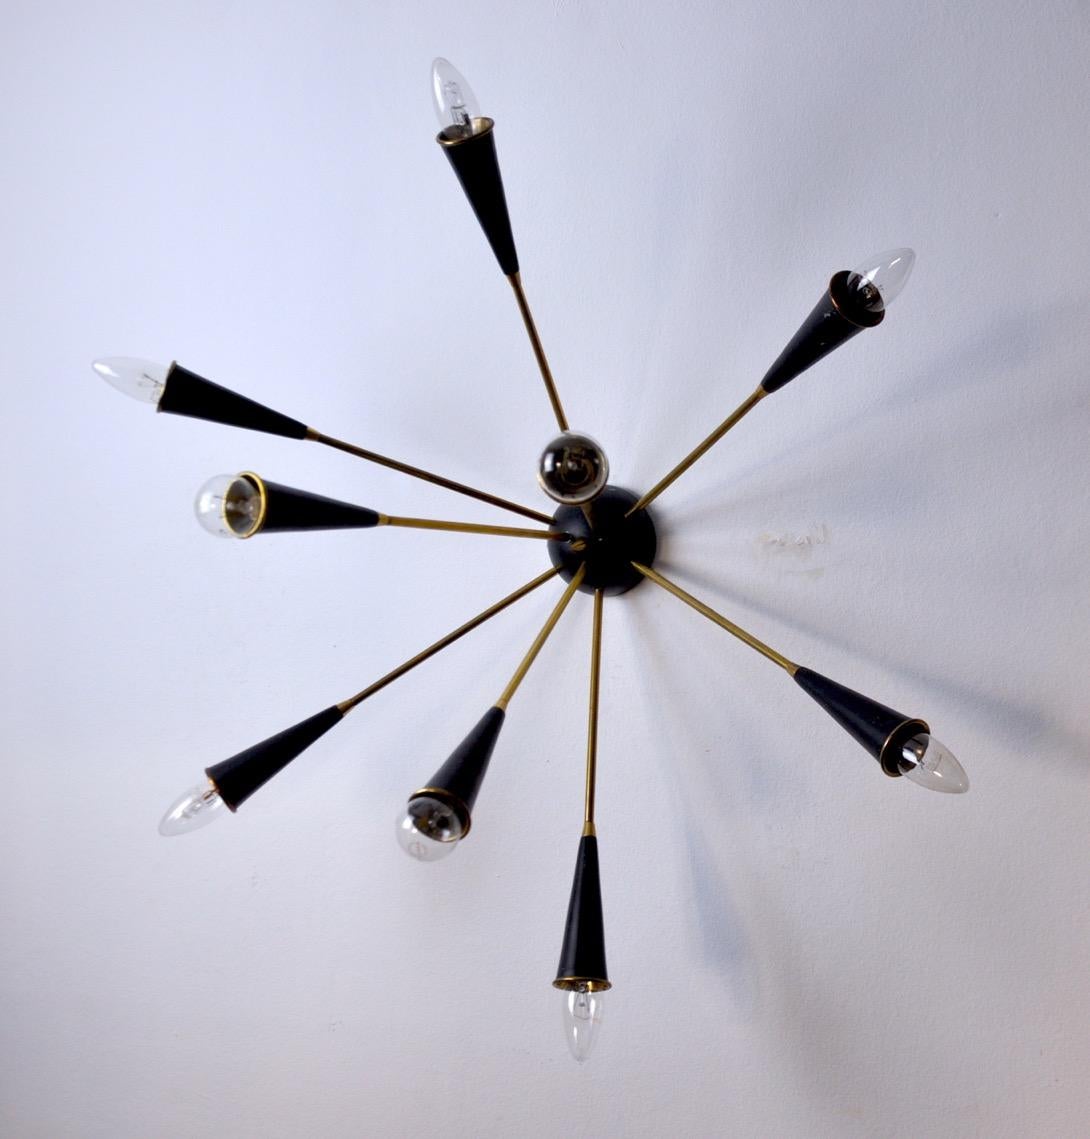 Superb sputnik wall lamp in the style of stilonovo, designed and produced in italy around 1960. This wall lamp is composed of 9 arms, a brass structure painted black. Rare design object that will illuminate your interior wonderfully. Electricity